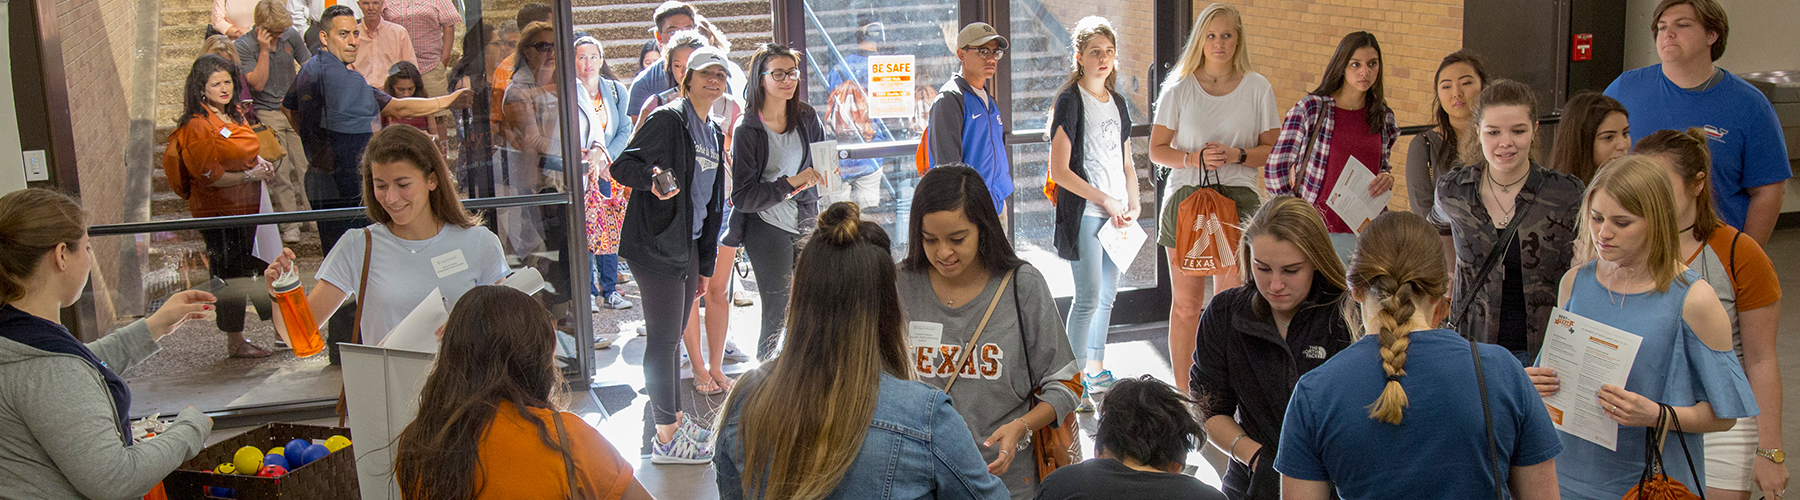 Undergraduate students get ready for the first day of classes in the College of Education,